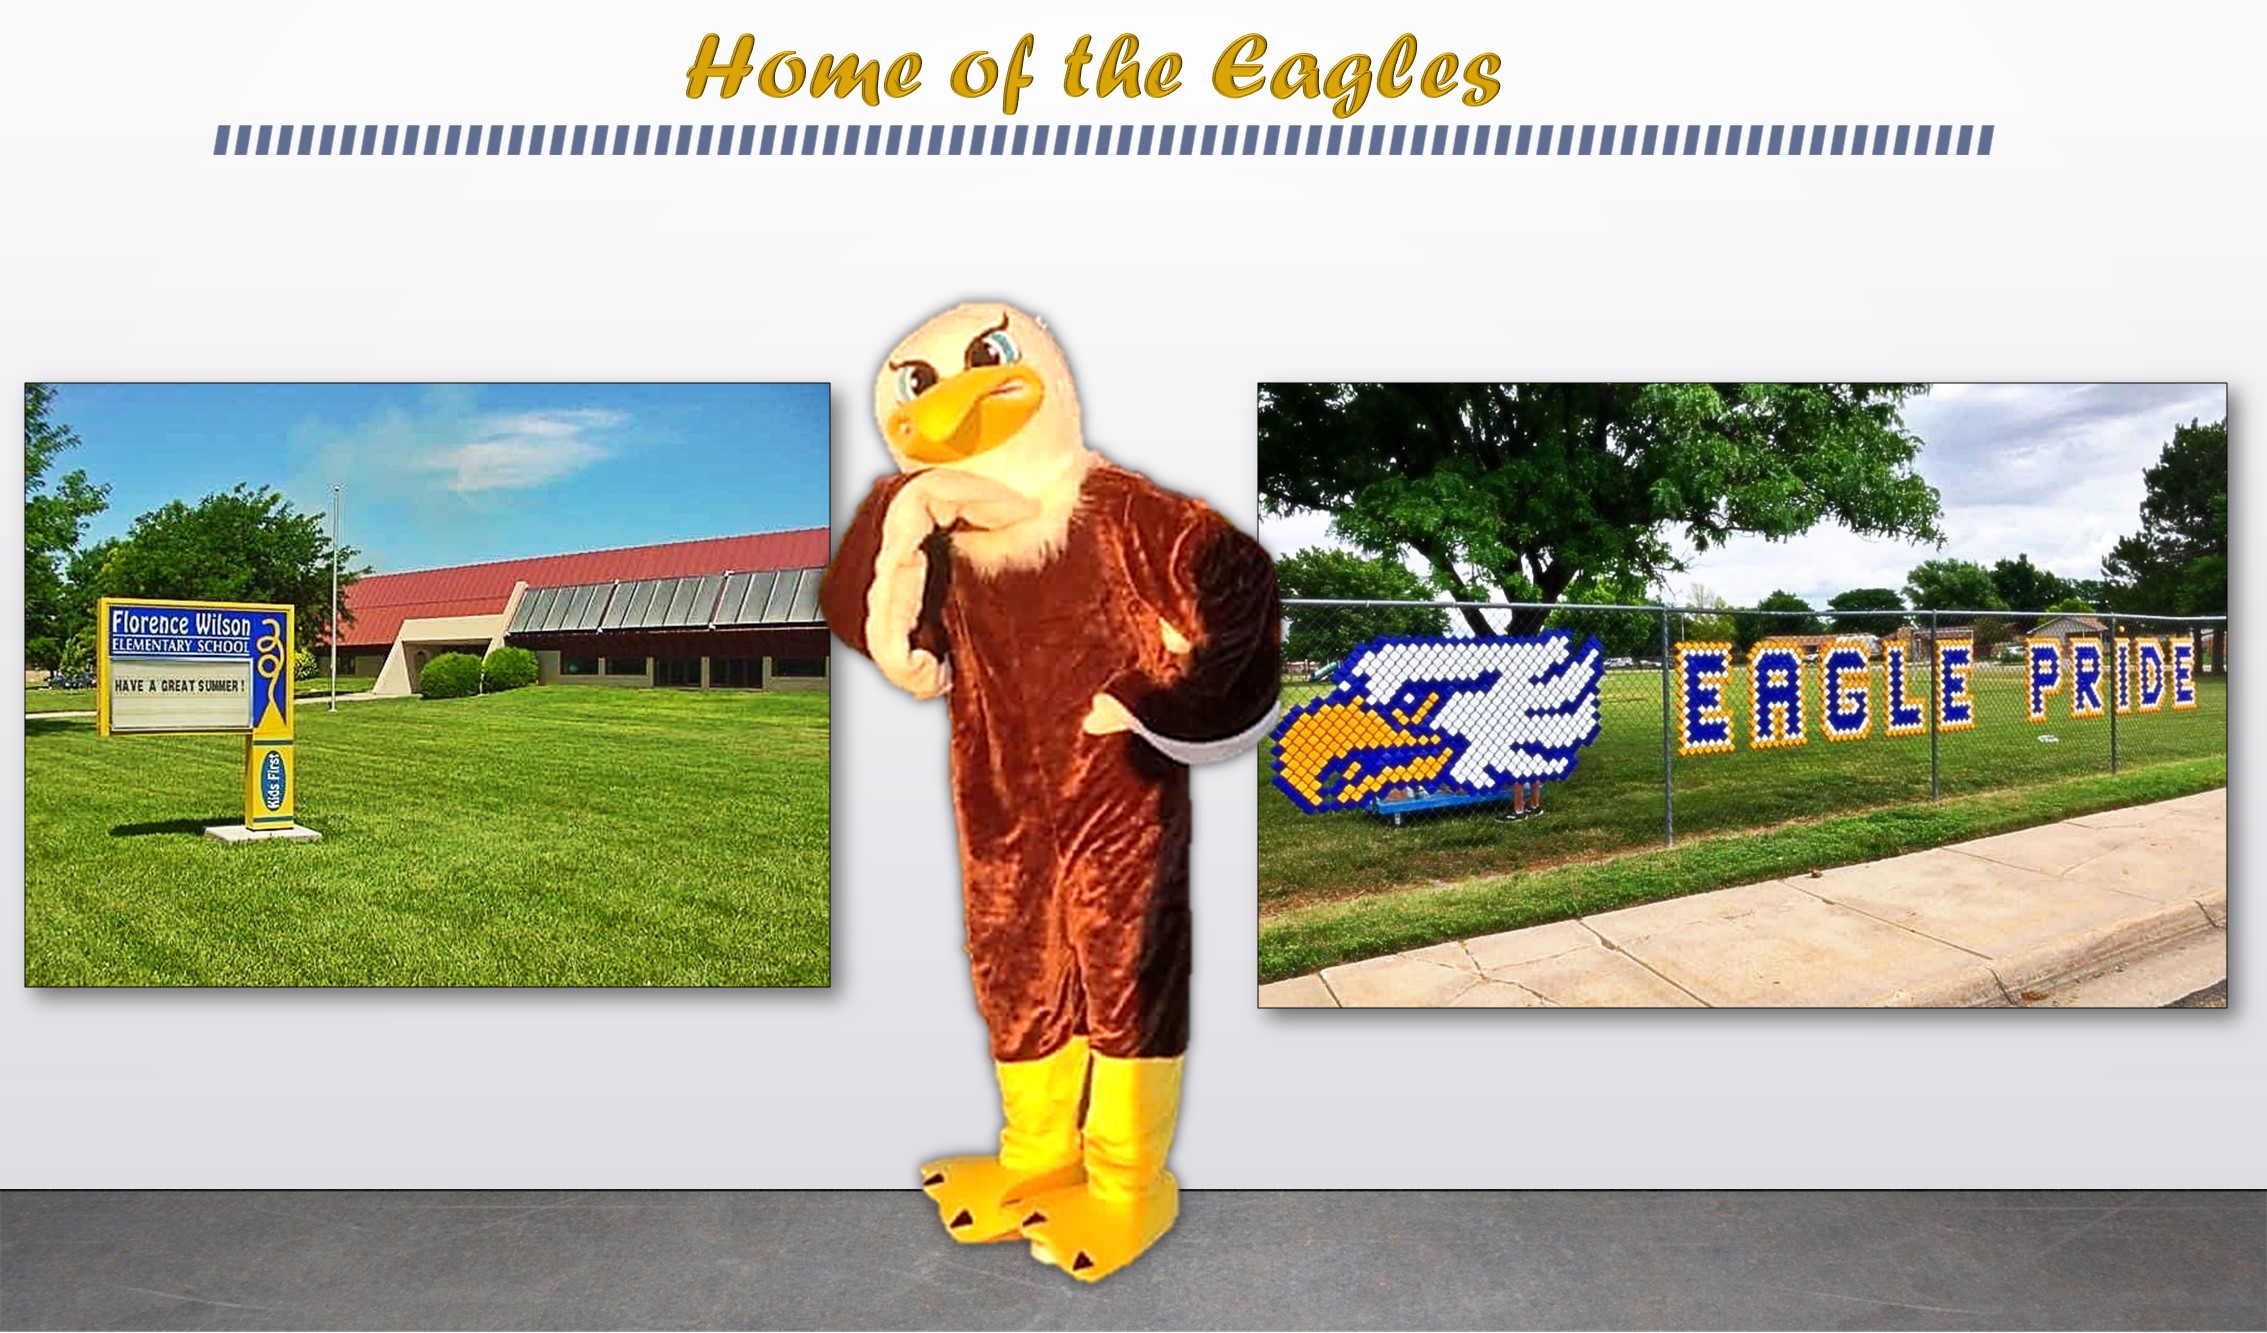 Home of the Eagles School pic